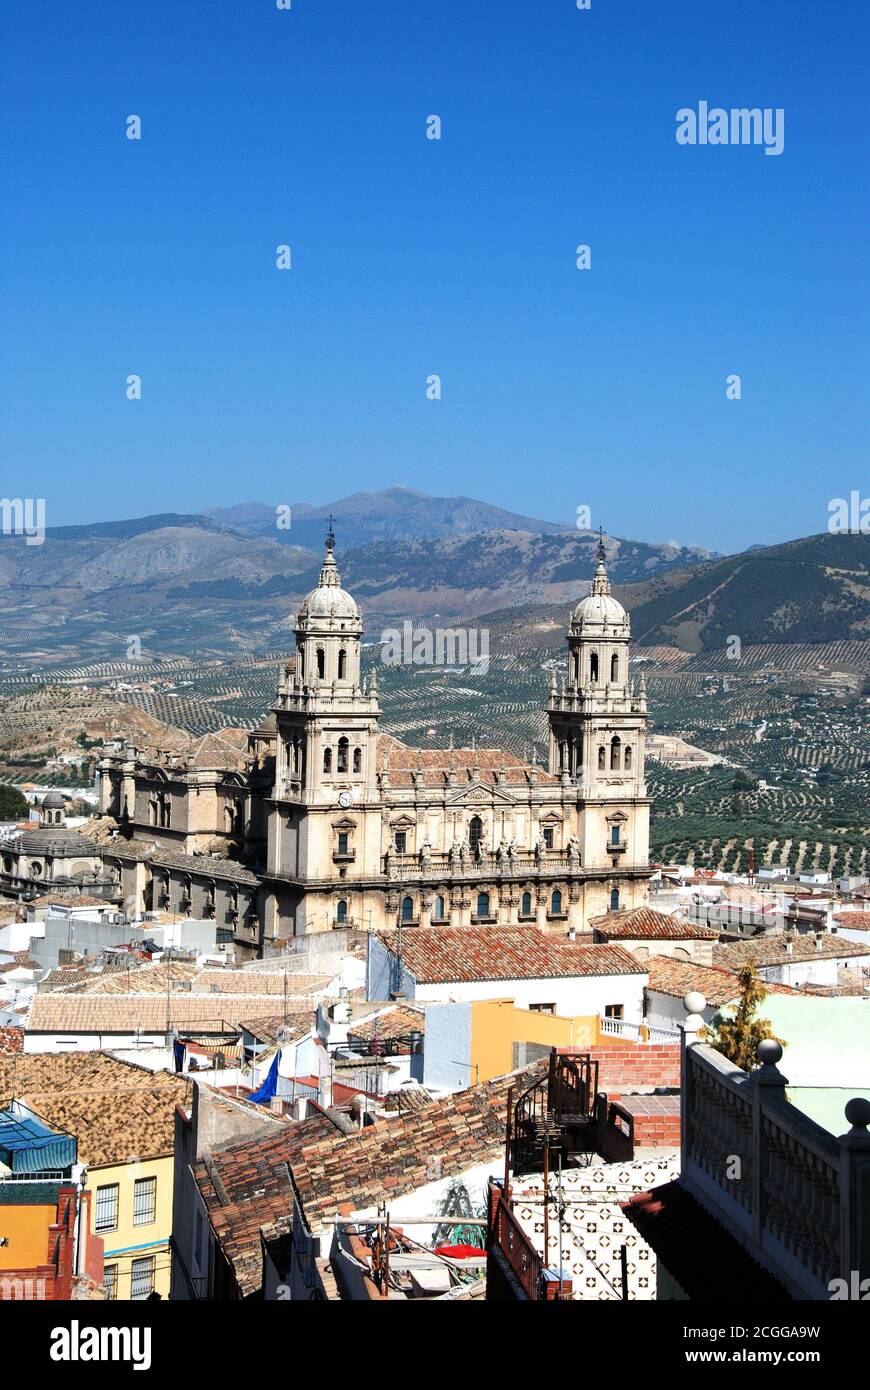 Elevated view of the Cathedral with olive groves to the rear, Jaen, Jaen Province, Andalucia, Spain, Western Europe Stock Photo